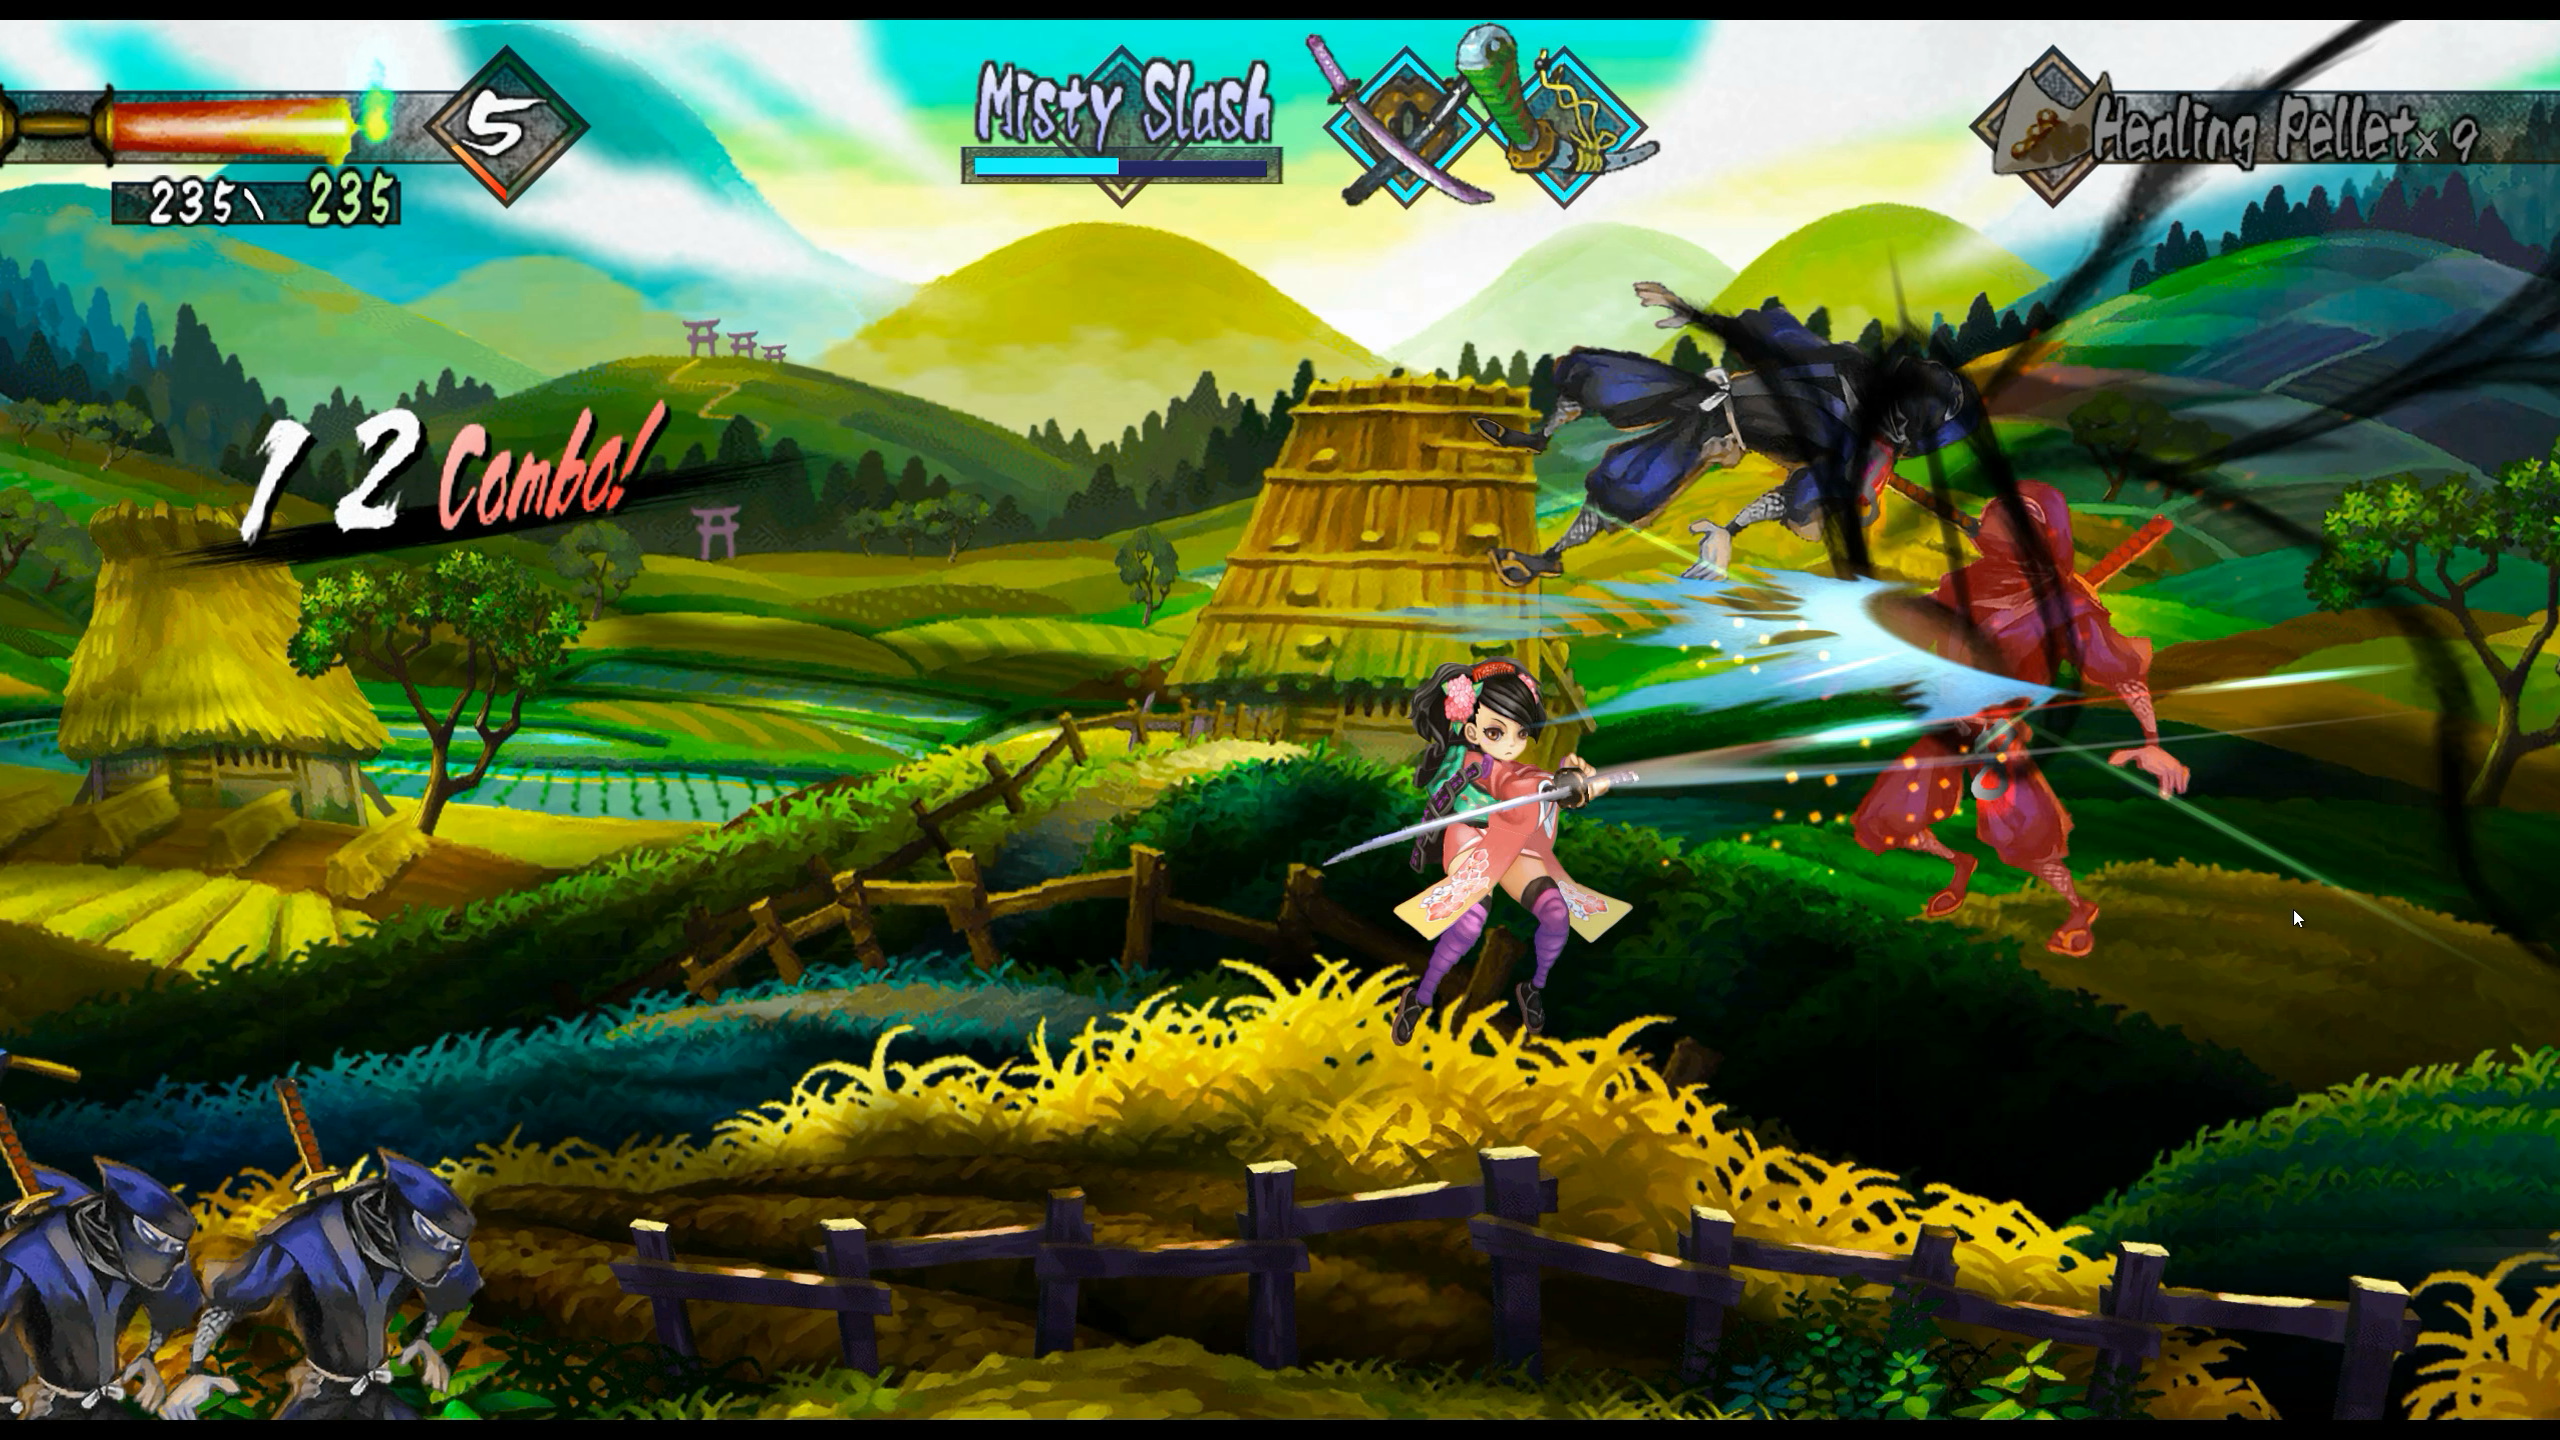 Muramasa Backgrounds, Compatible - PC, Mobile, Gadgets| 2560x1440 px